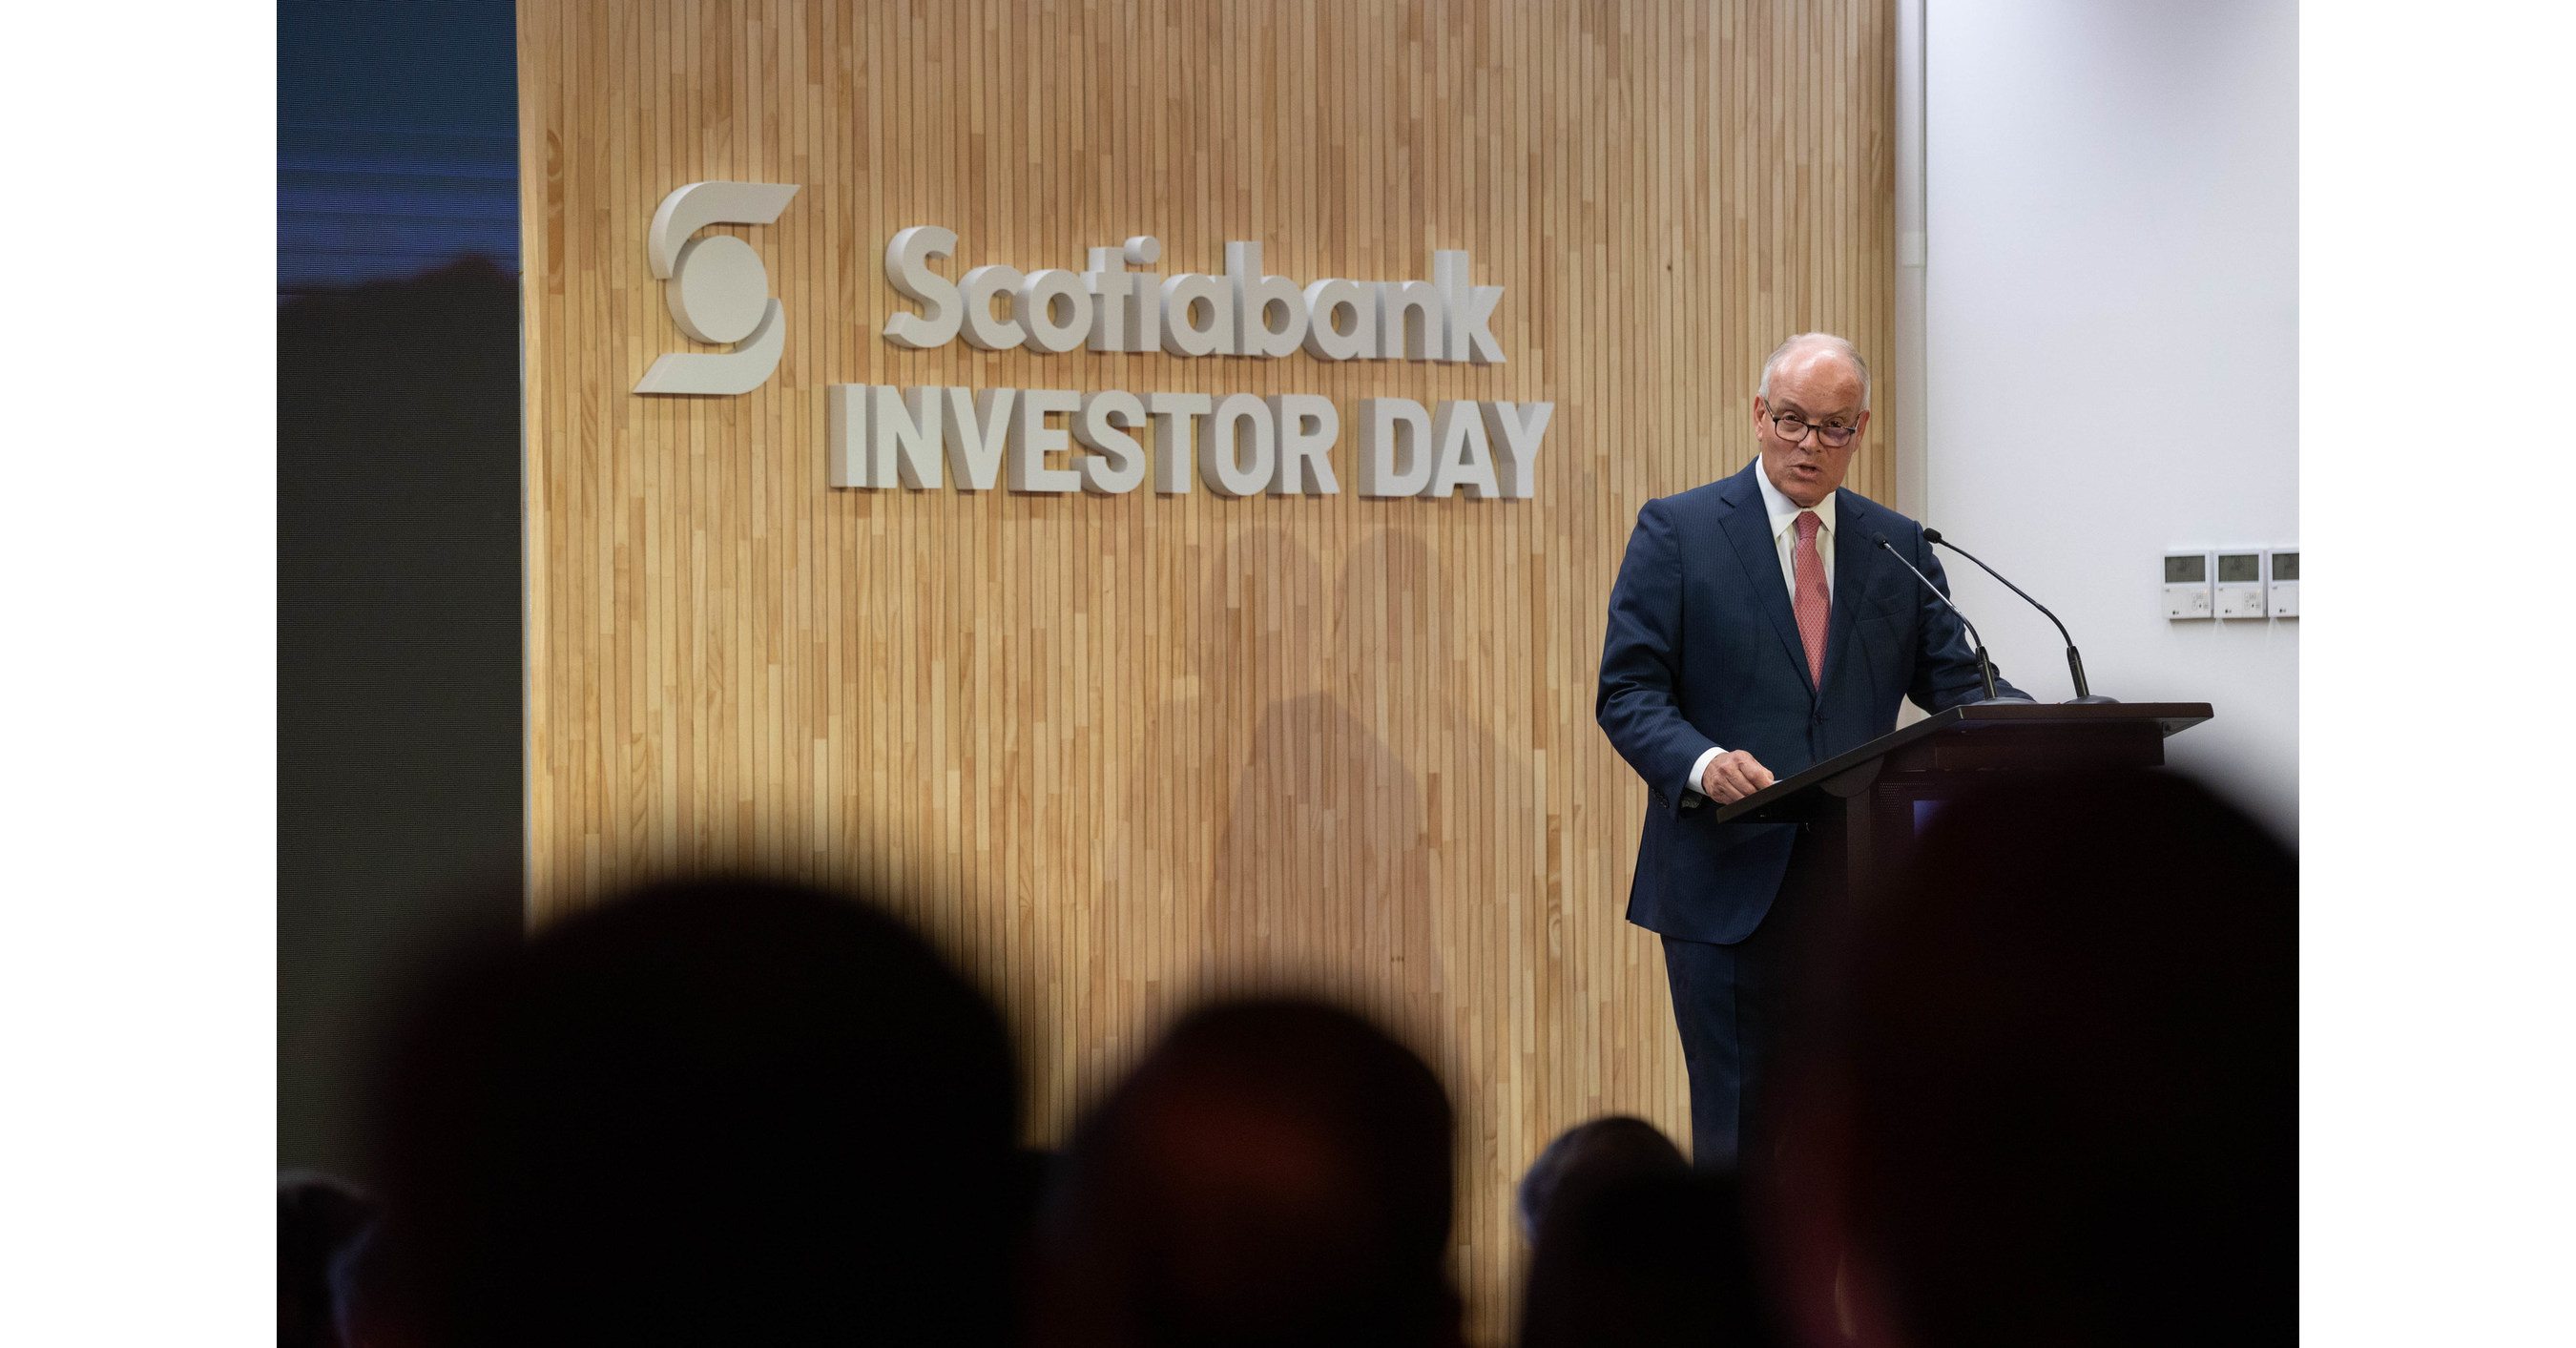 Scotiabank Scotiabank Completes Its Investor Day In Santiago  Ch ?p=facebook